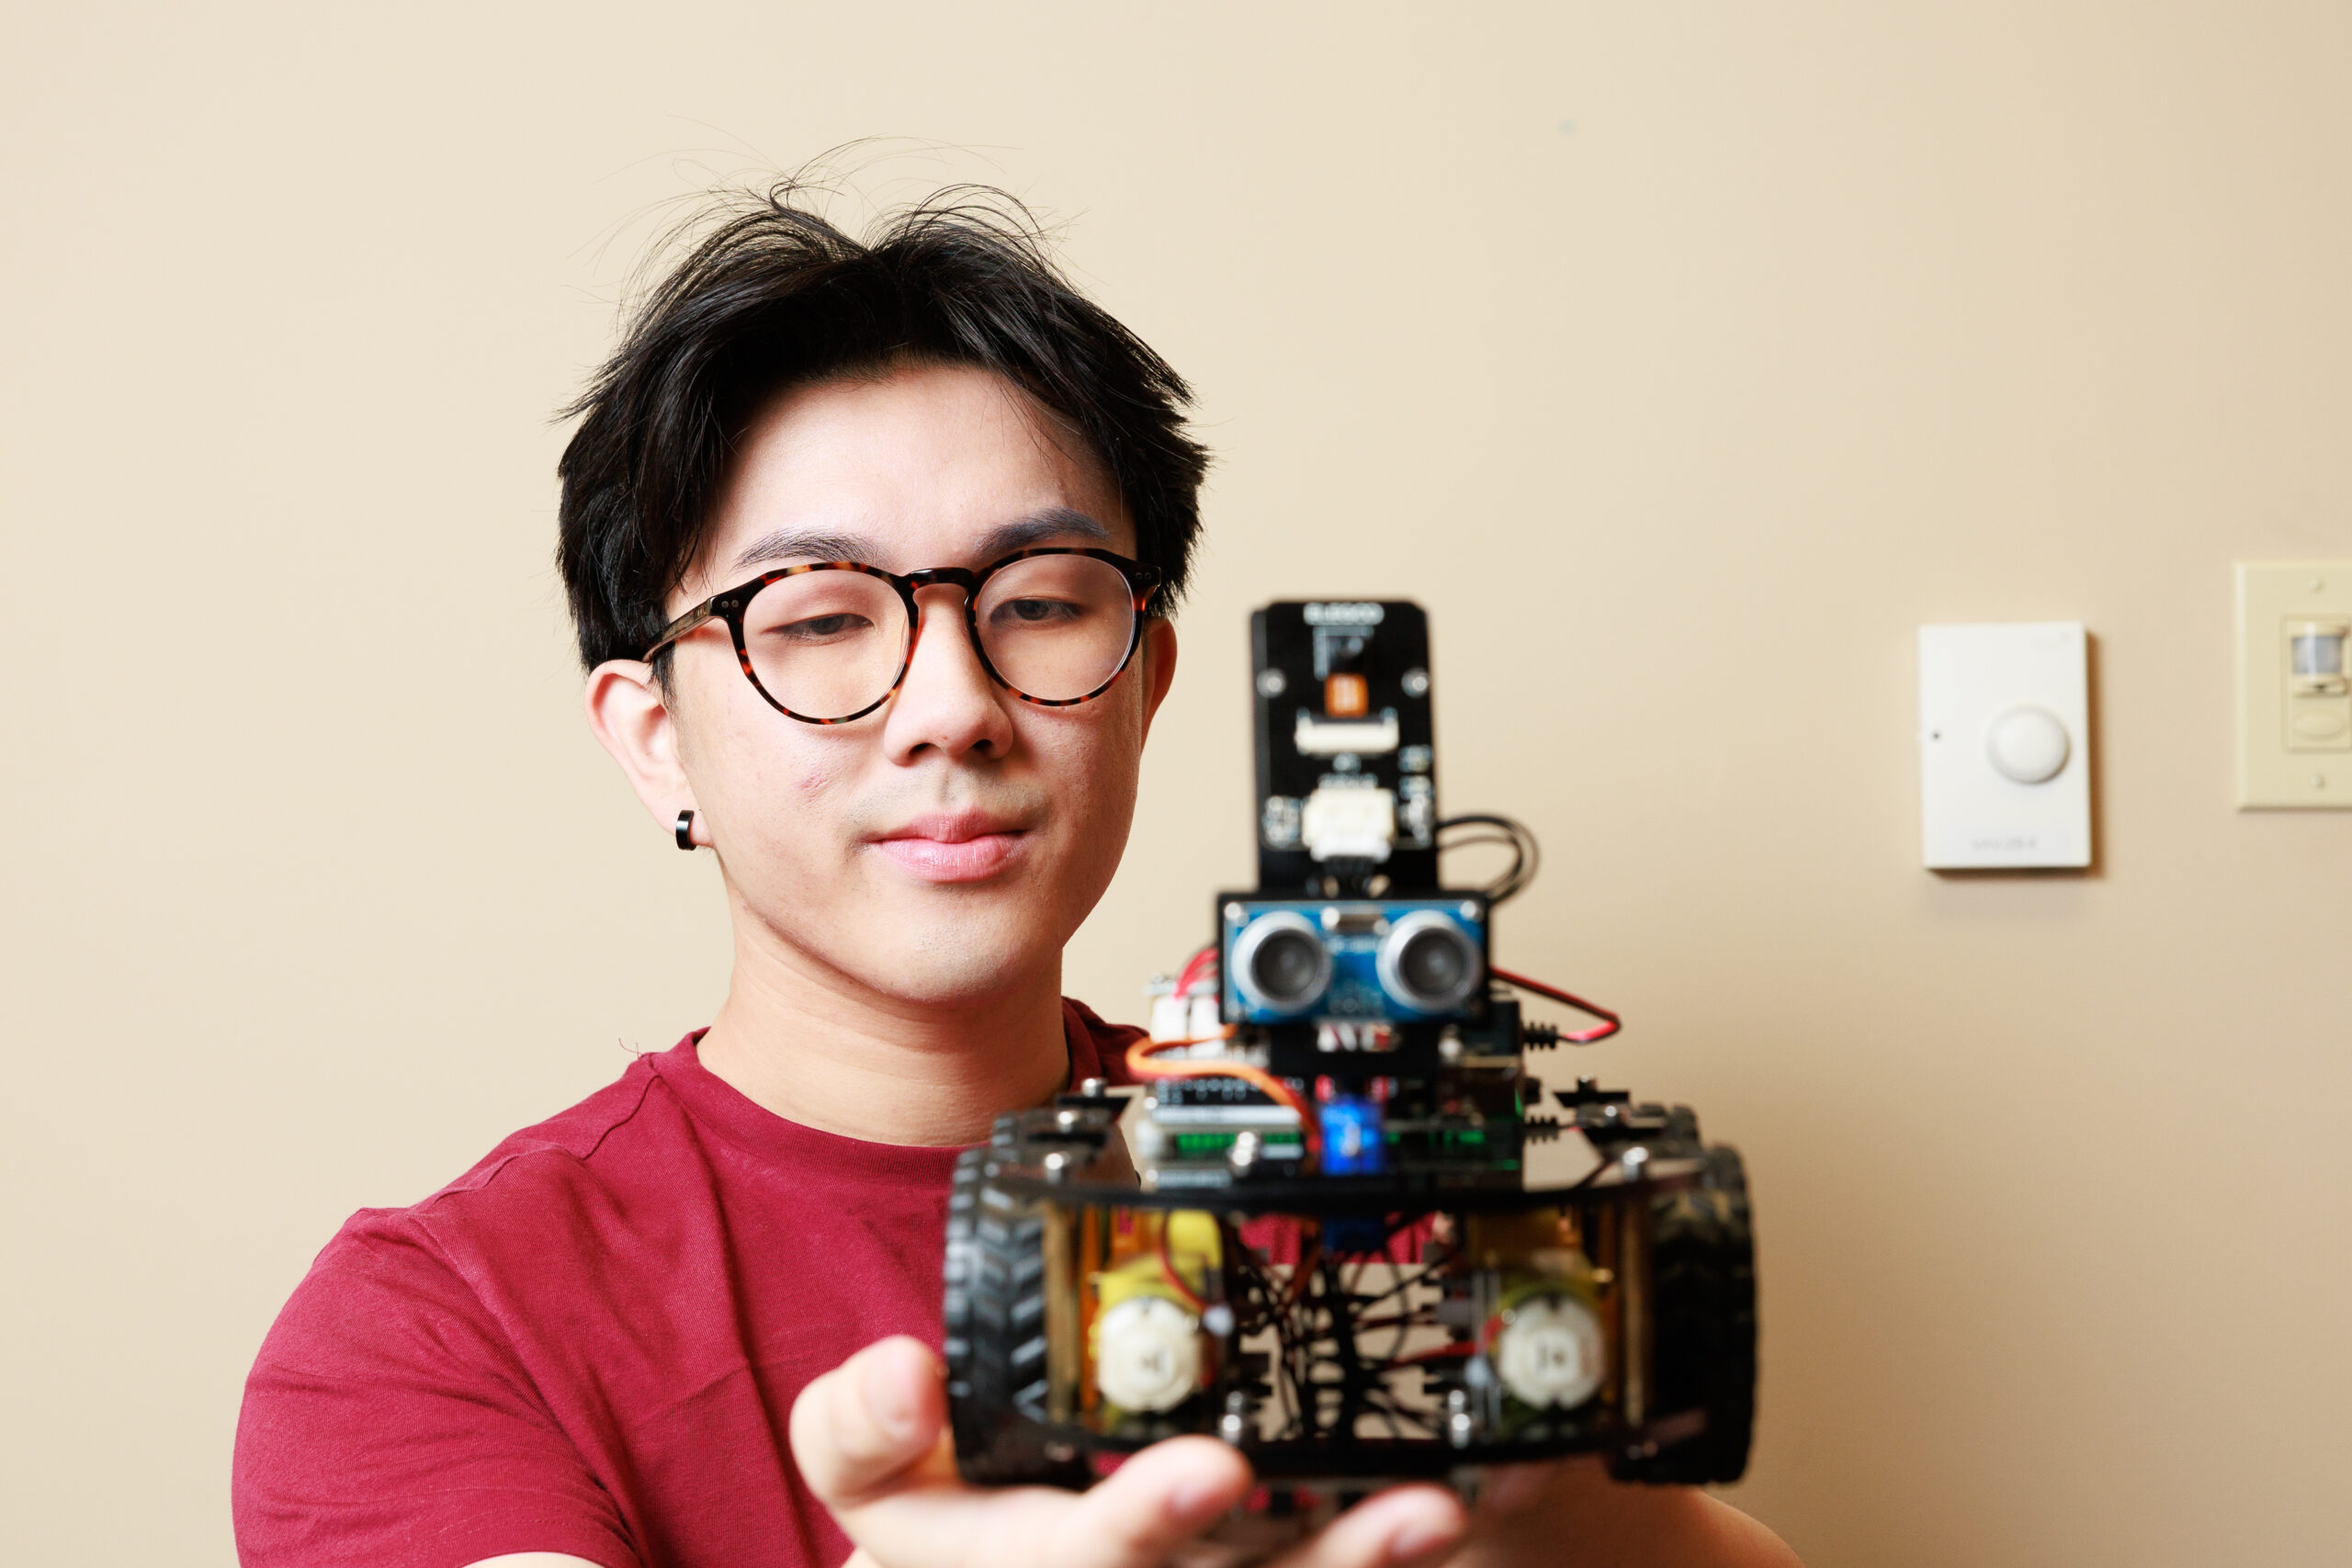 A student holding a robot